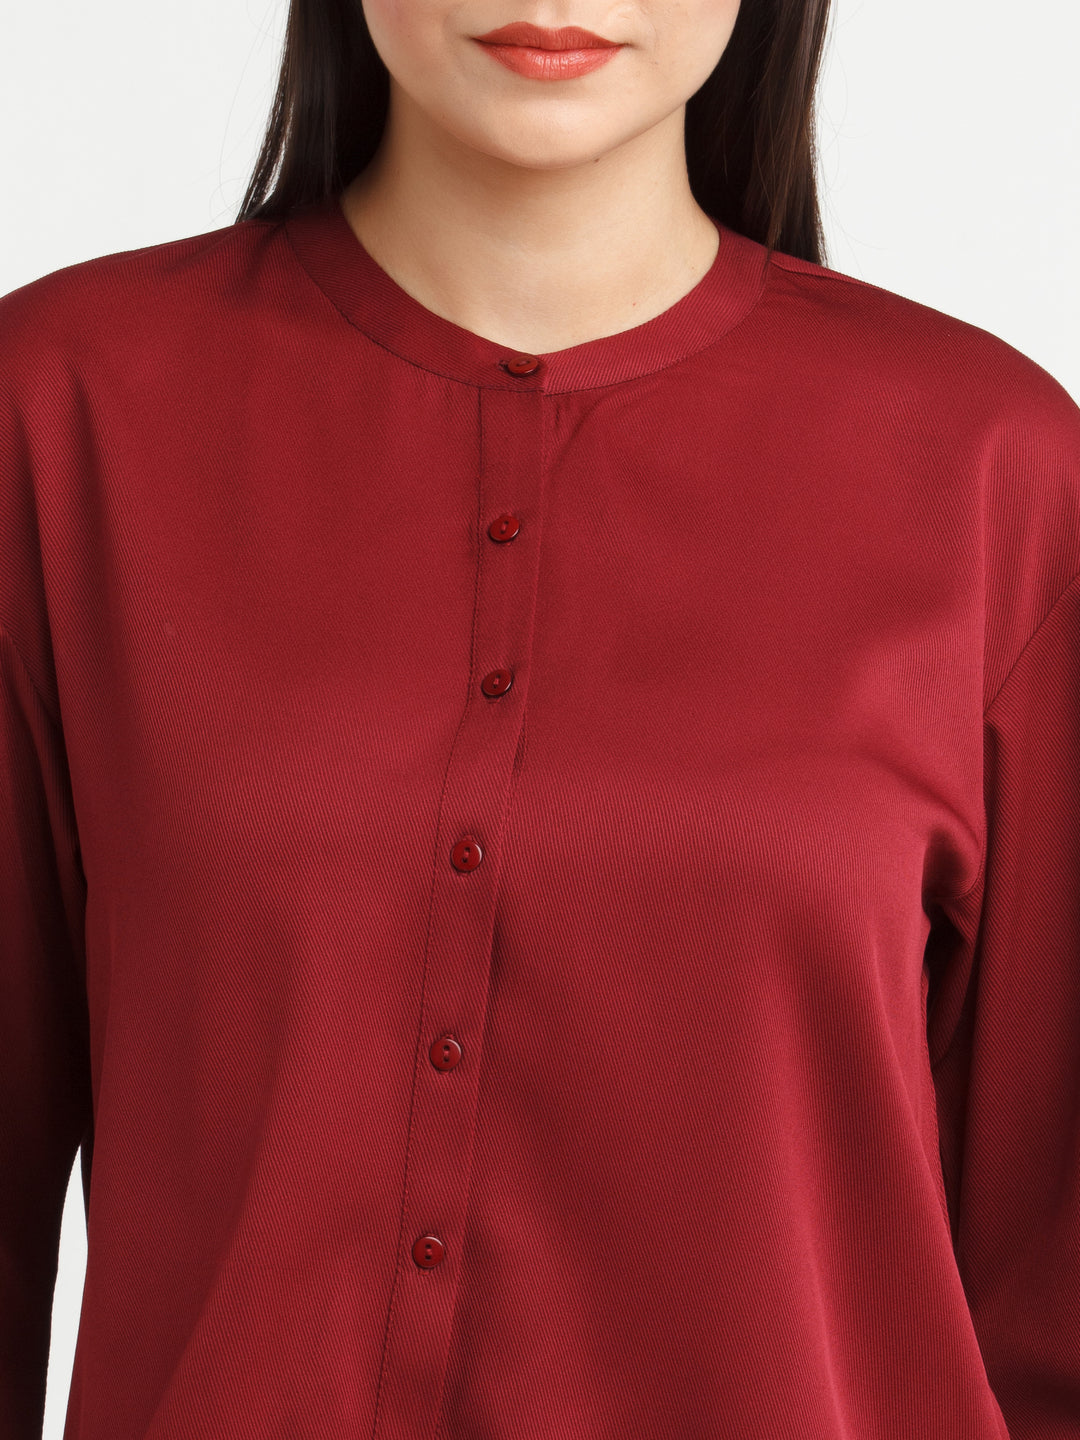 Solid-Polyester-Top-VT02985_137-Maroon-6